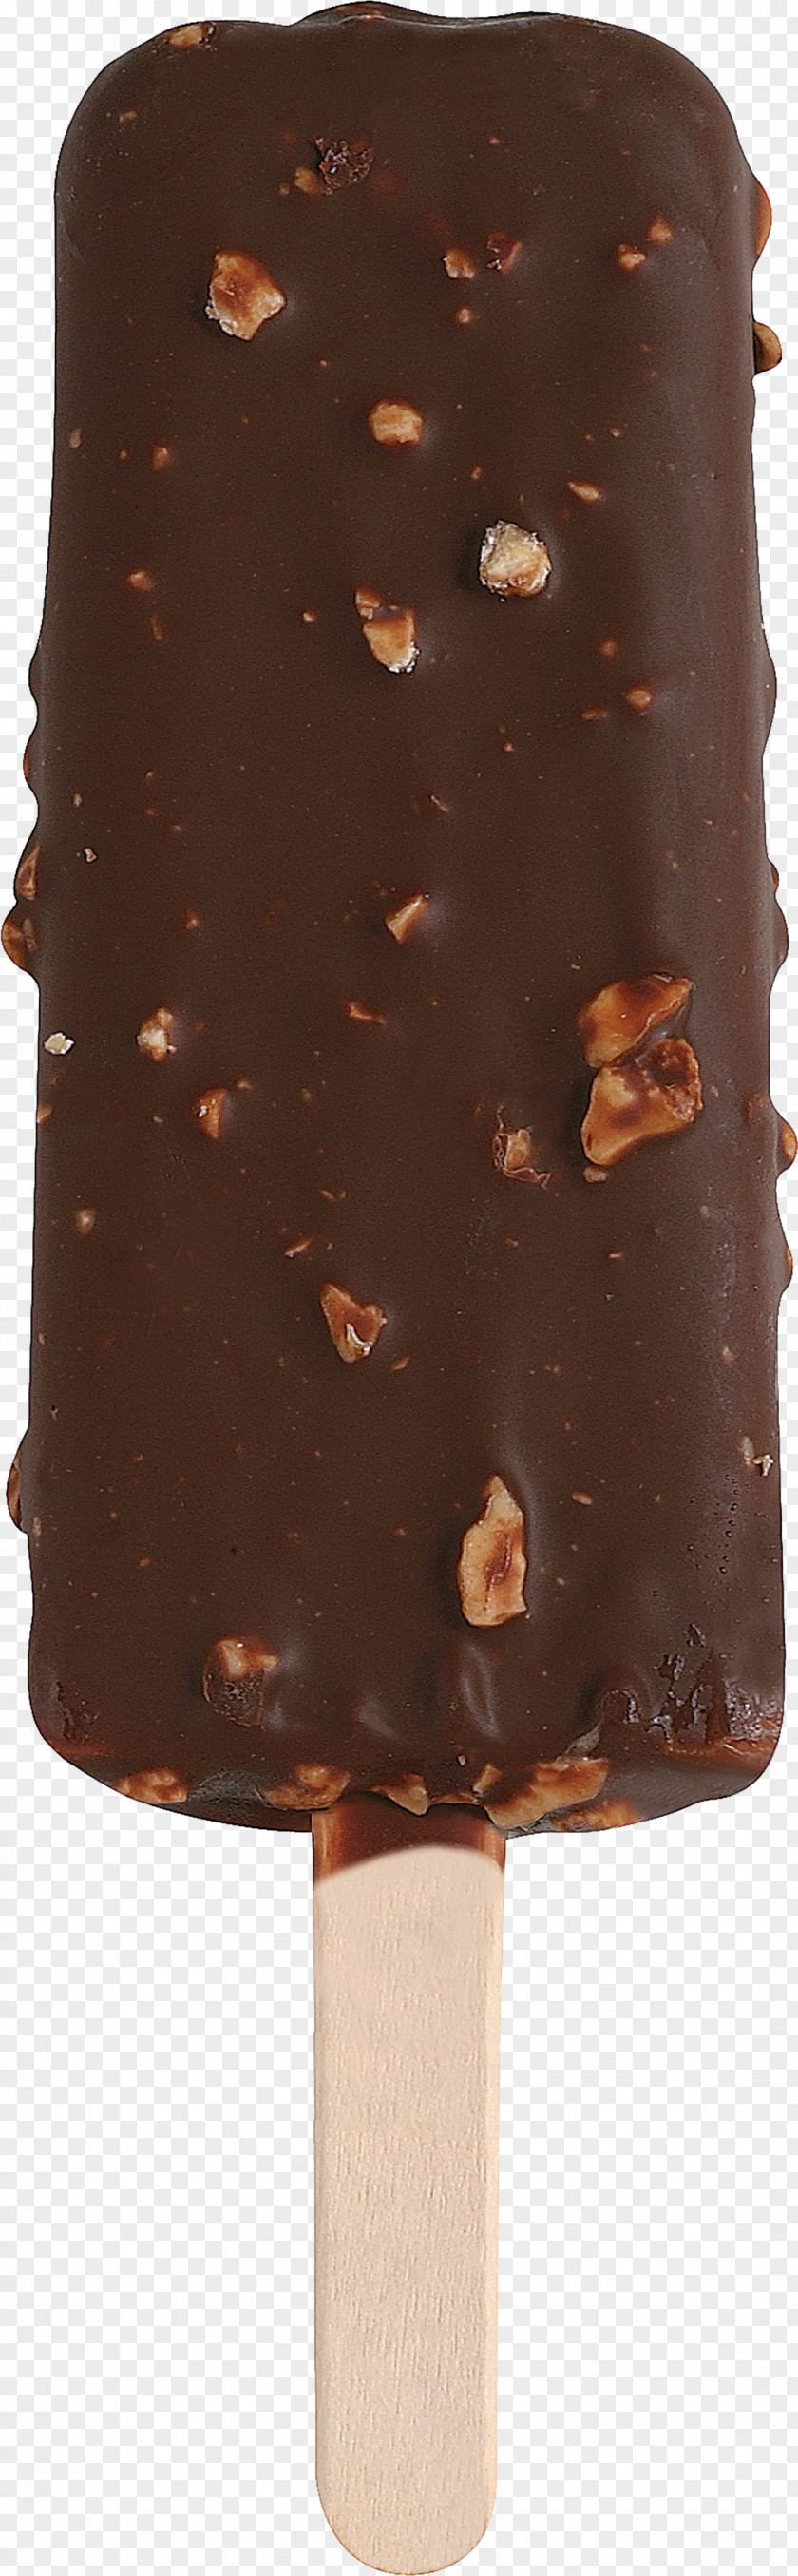 Chocolate Ice Cream Image Brownie Chip Cookie PNG